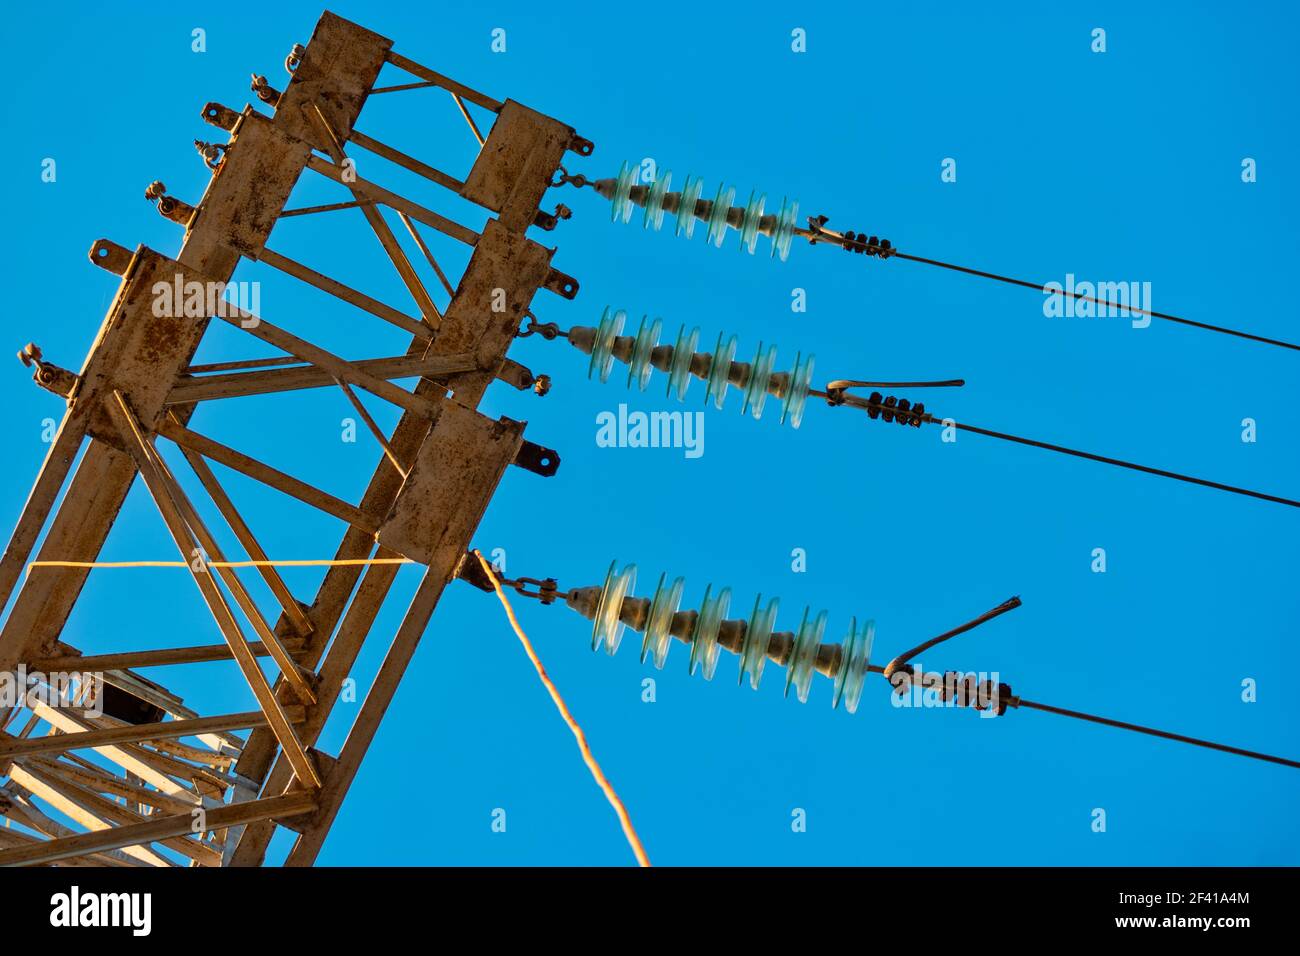 High voltage transmission power tower with glass insulators and wires against blue sky. High voltage transmission power tower with glass insulators and wires against sky Stock Photo